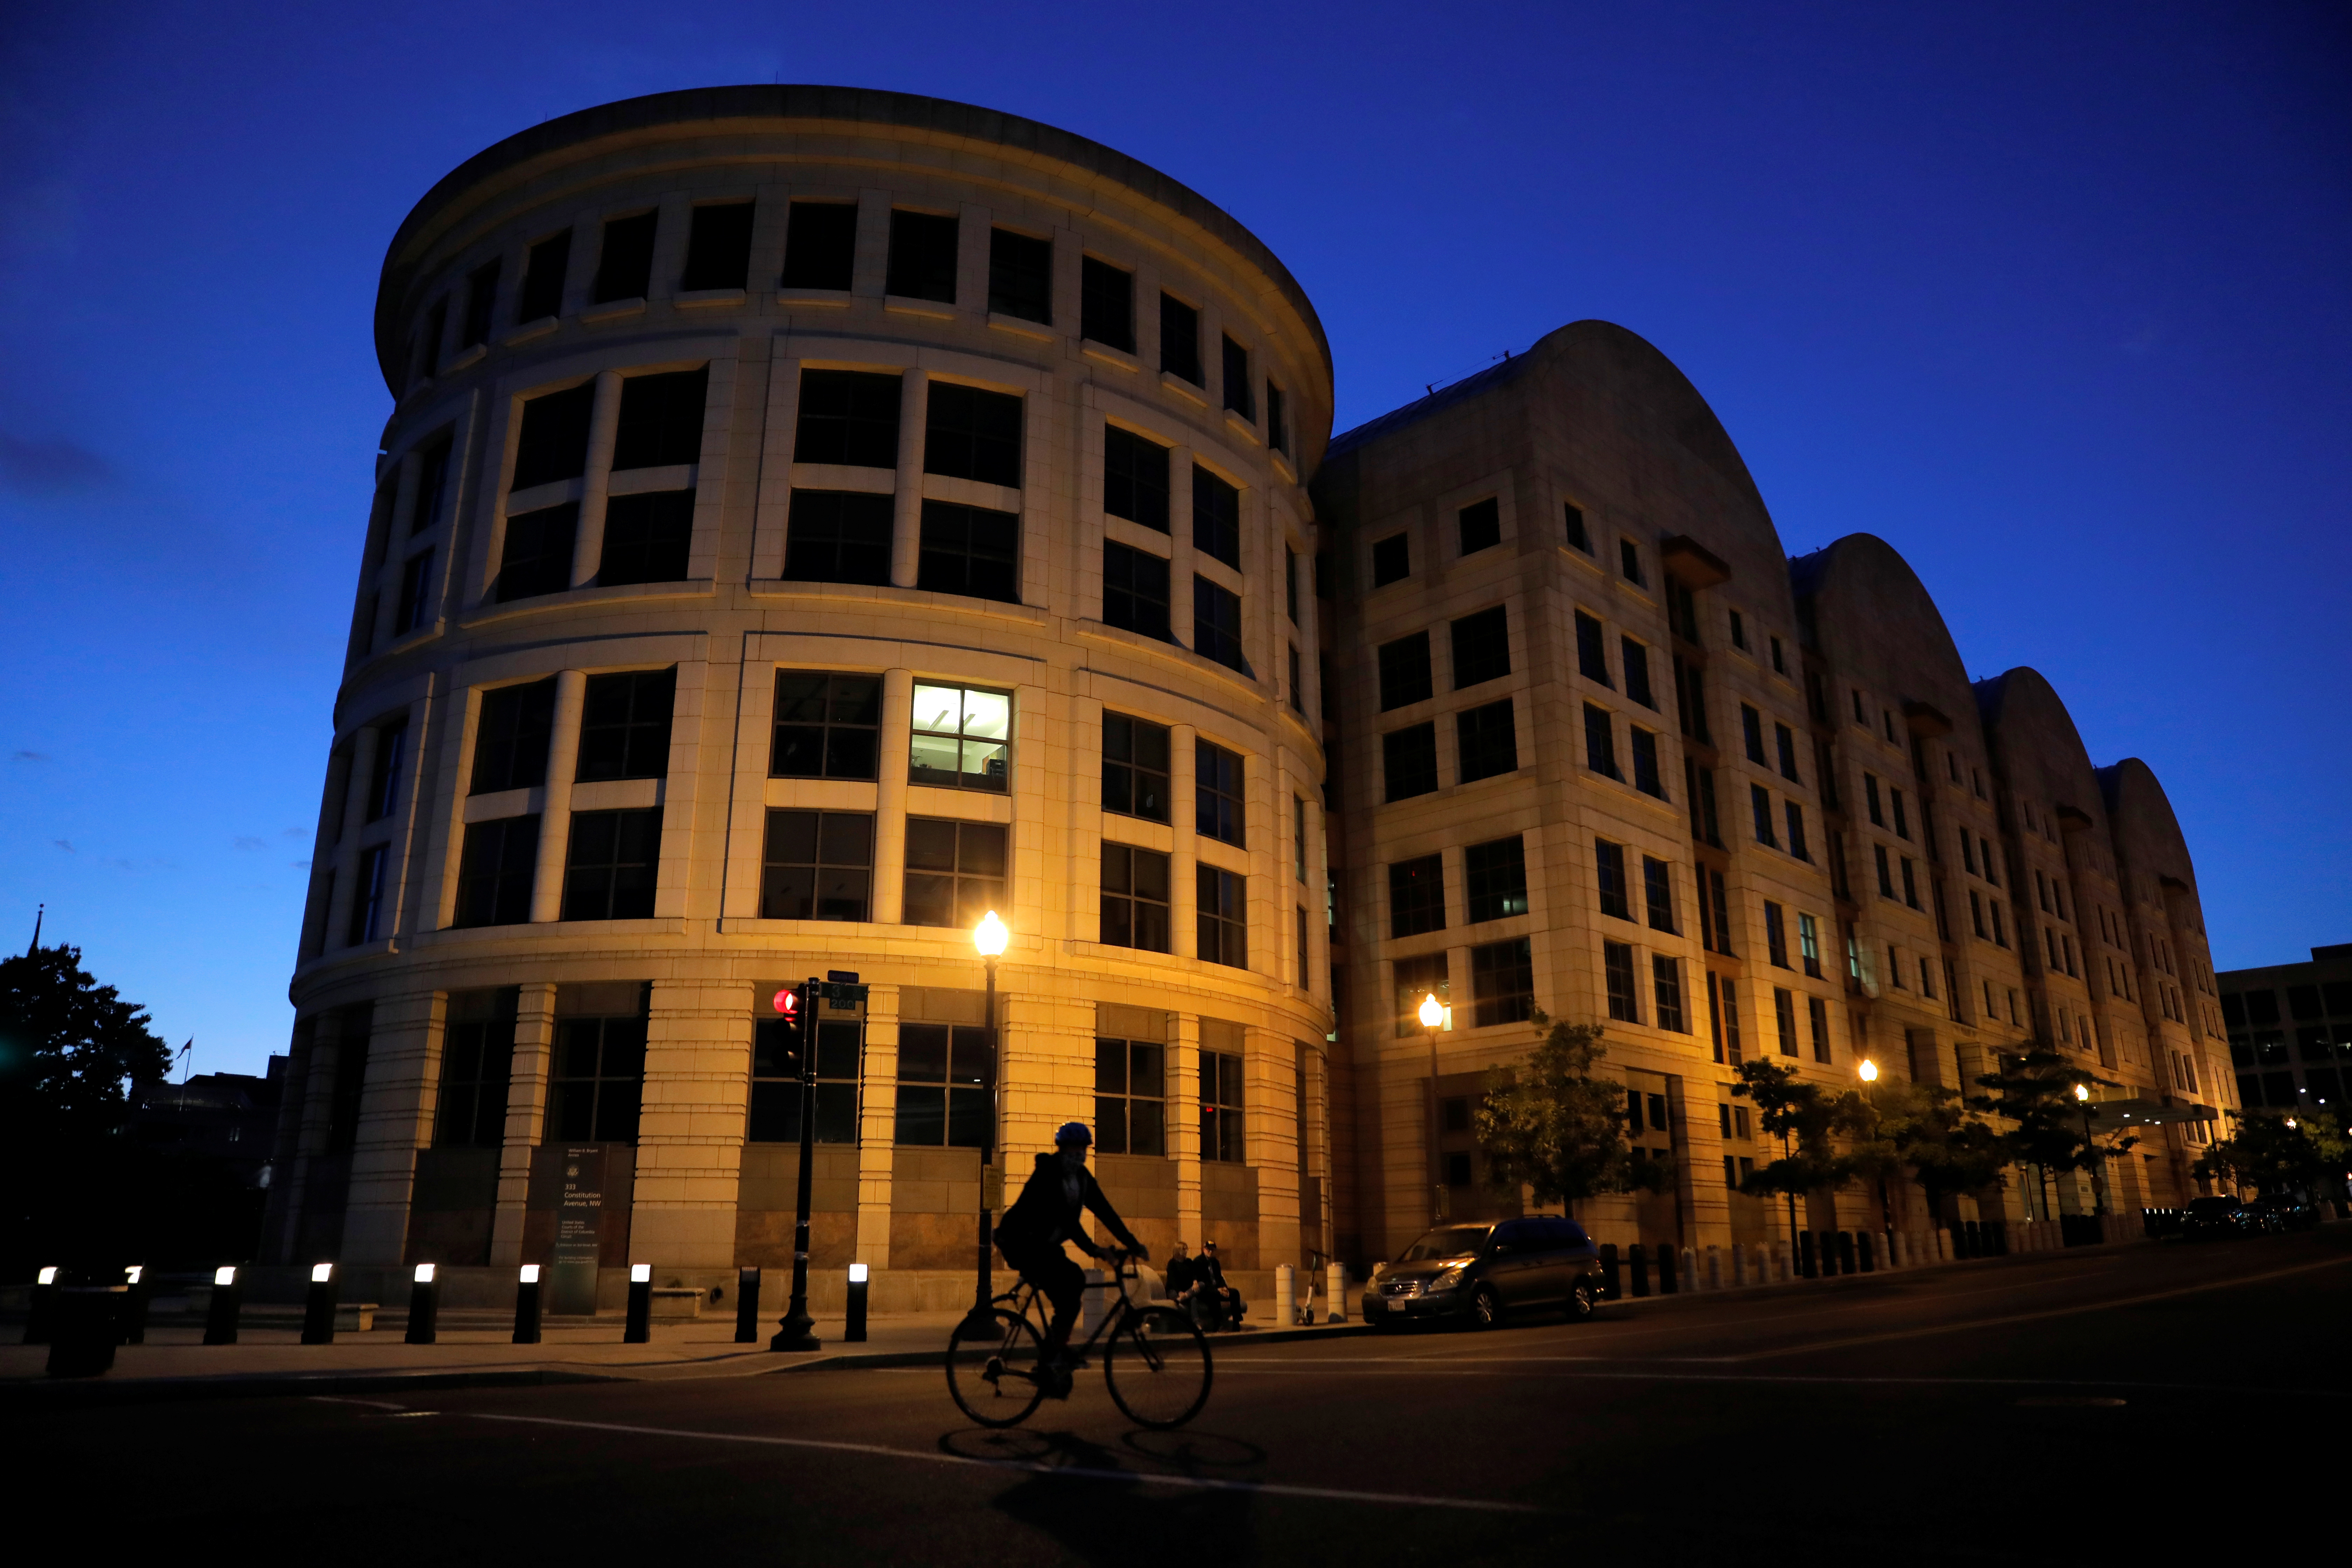 A person rides a bicycle past the U.S. District Court in Washington, D.C.